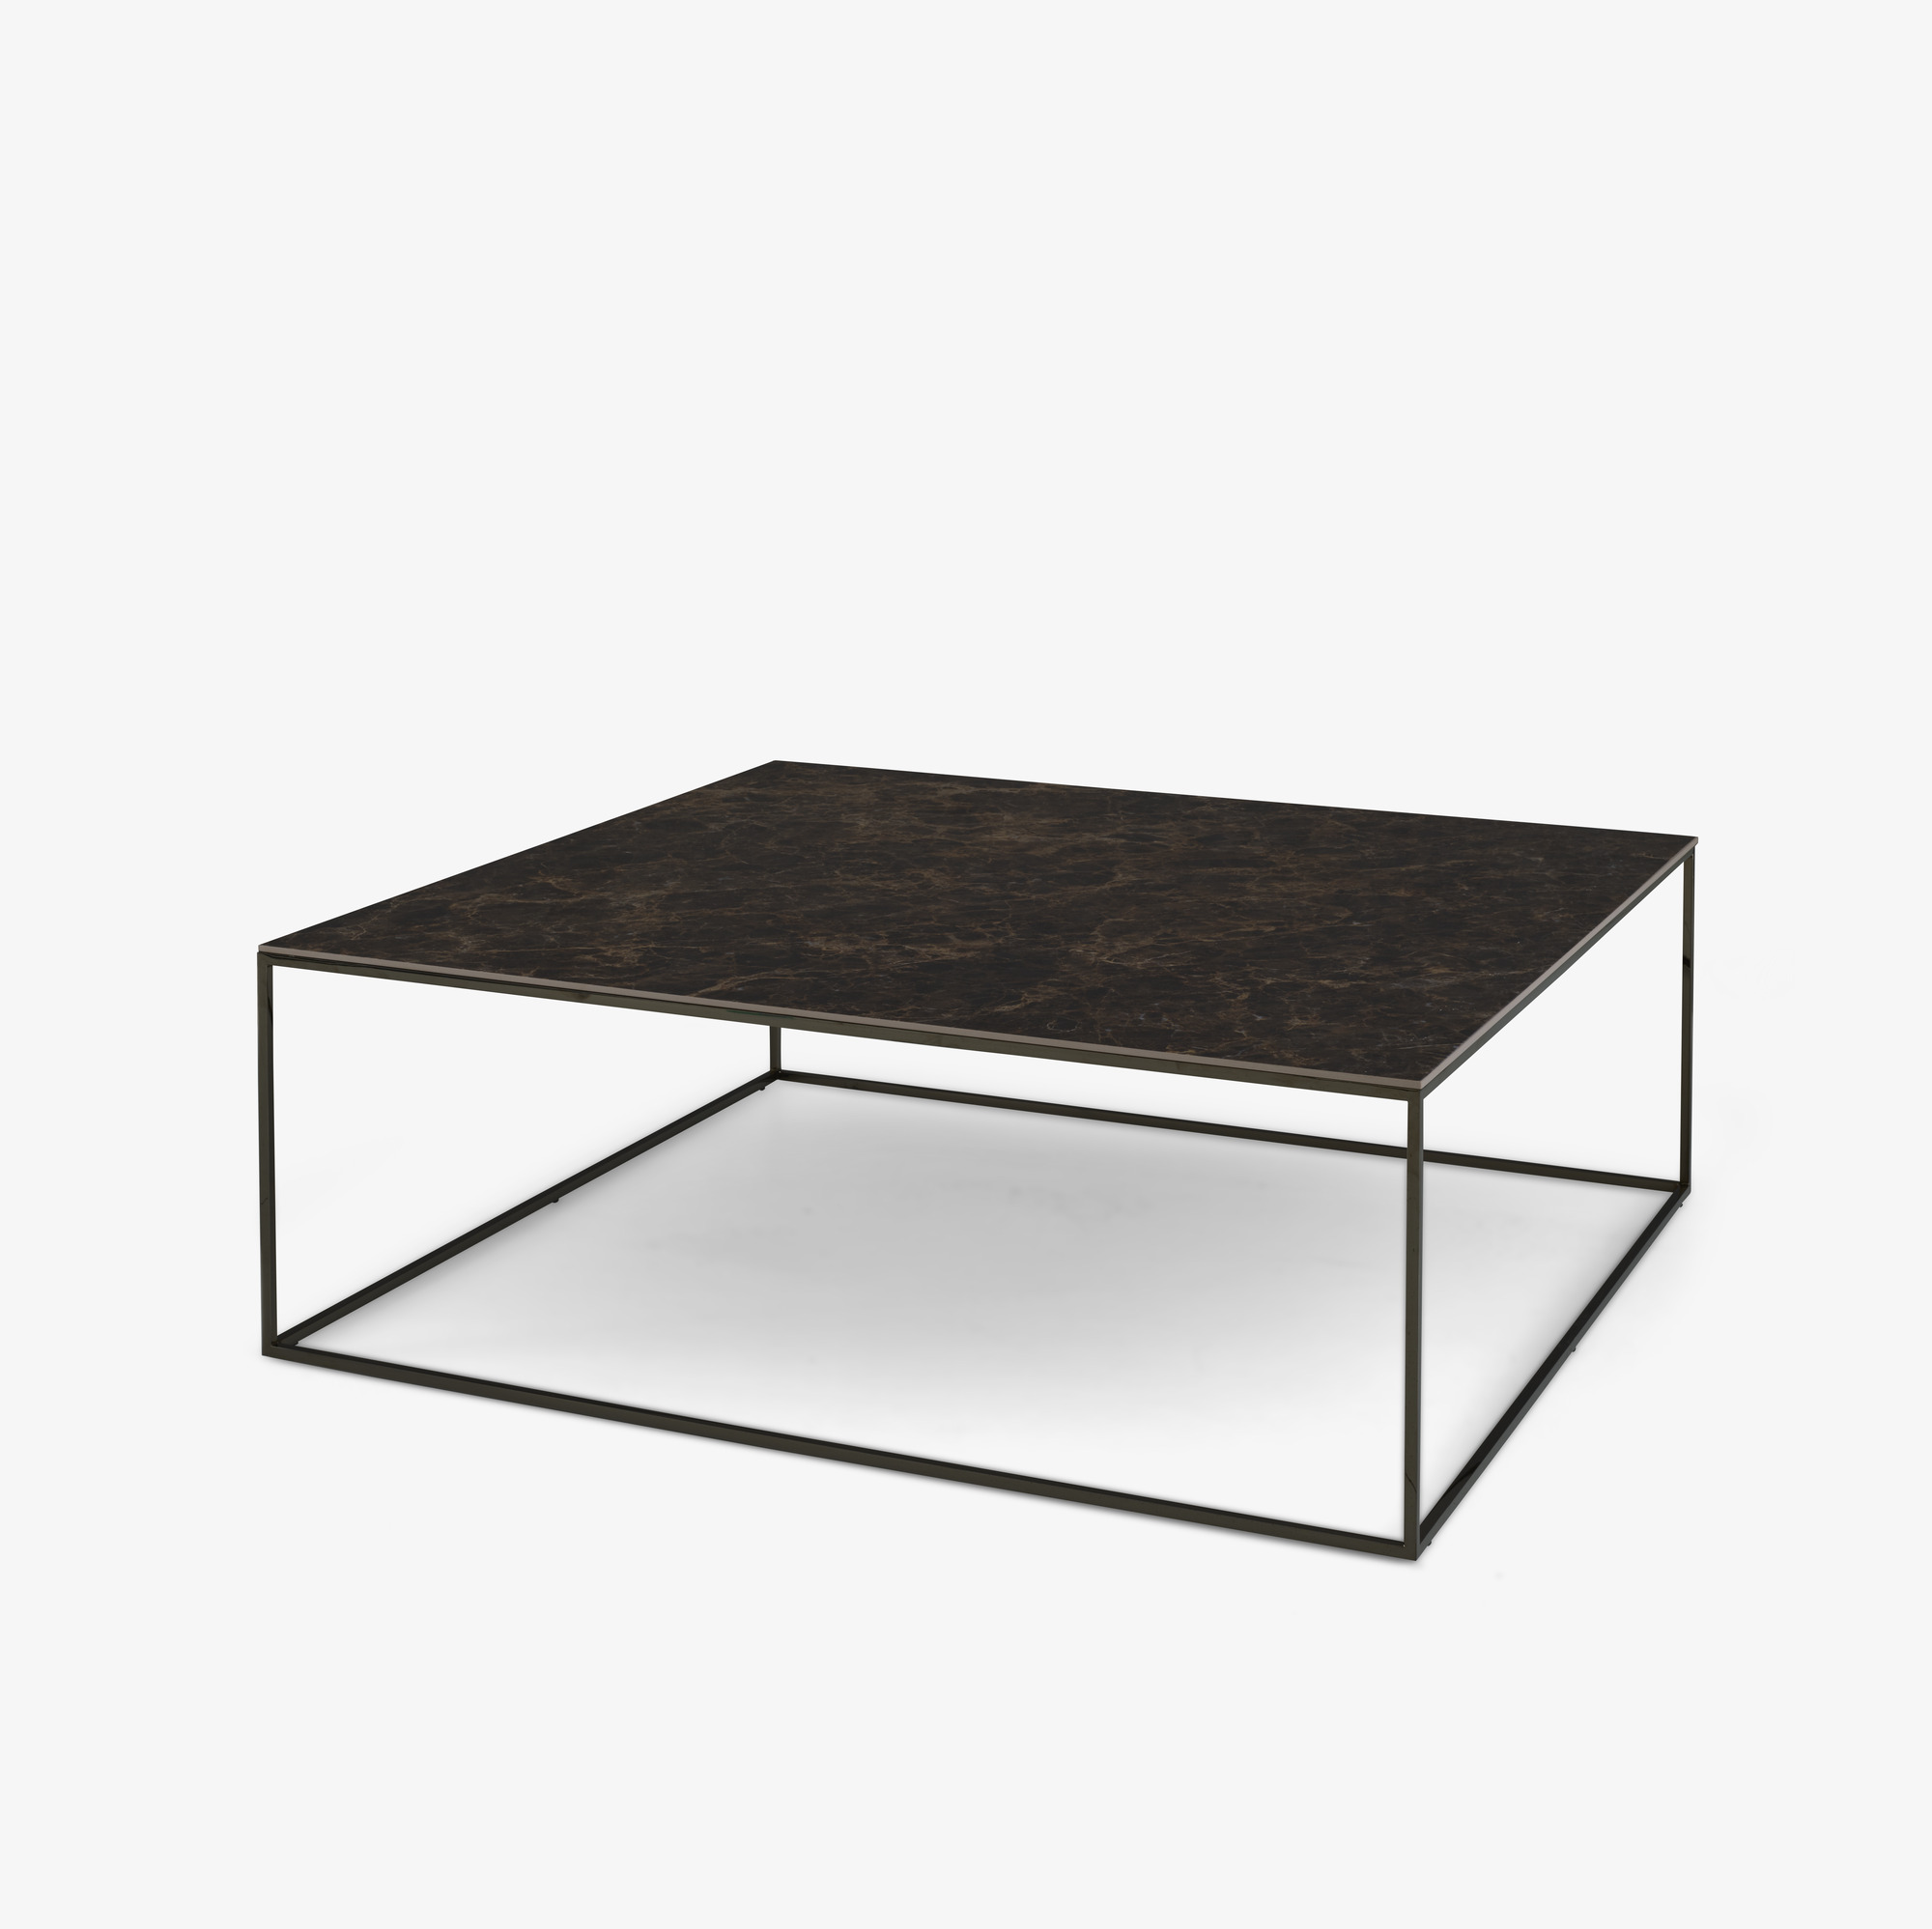 Image Low table - large - 2